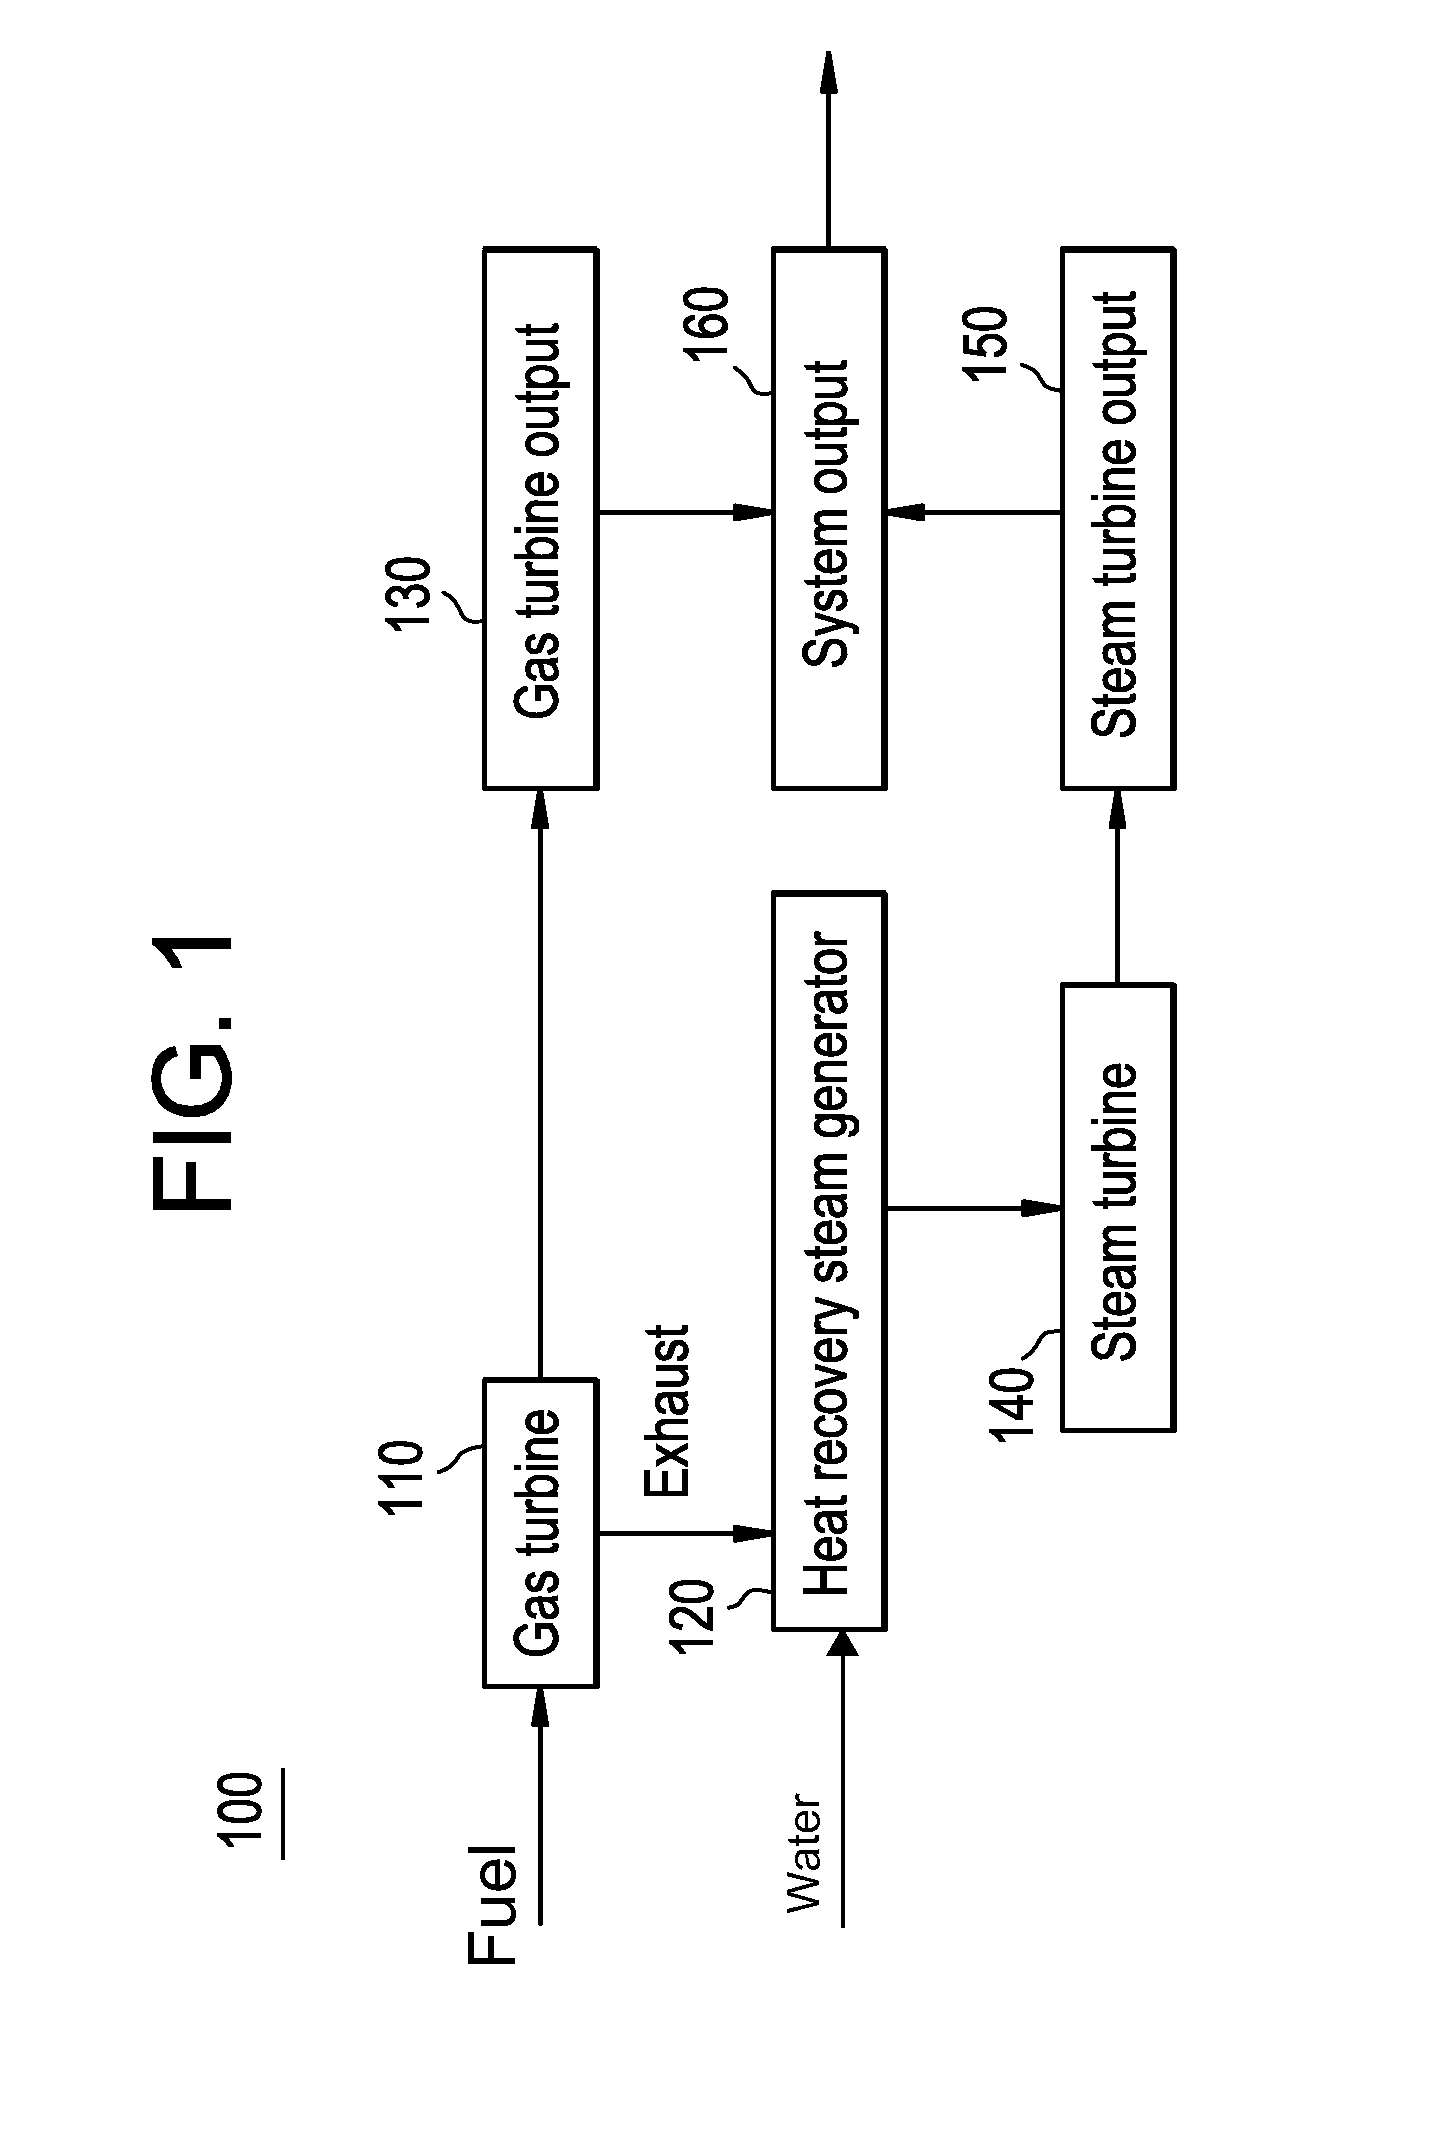 System and method for controlling and diagnosing a combined cycle power plant